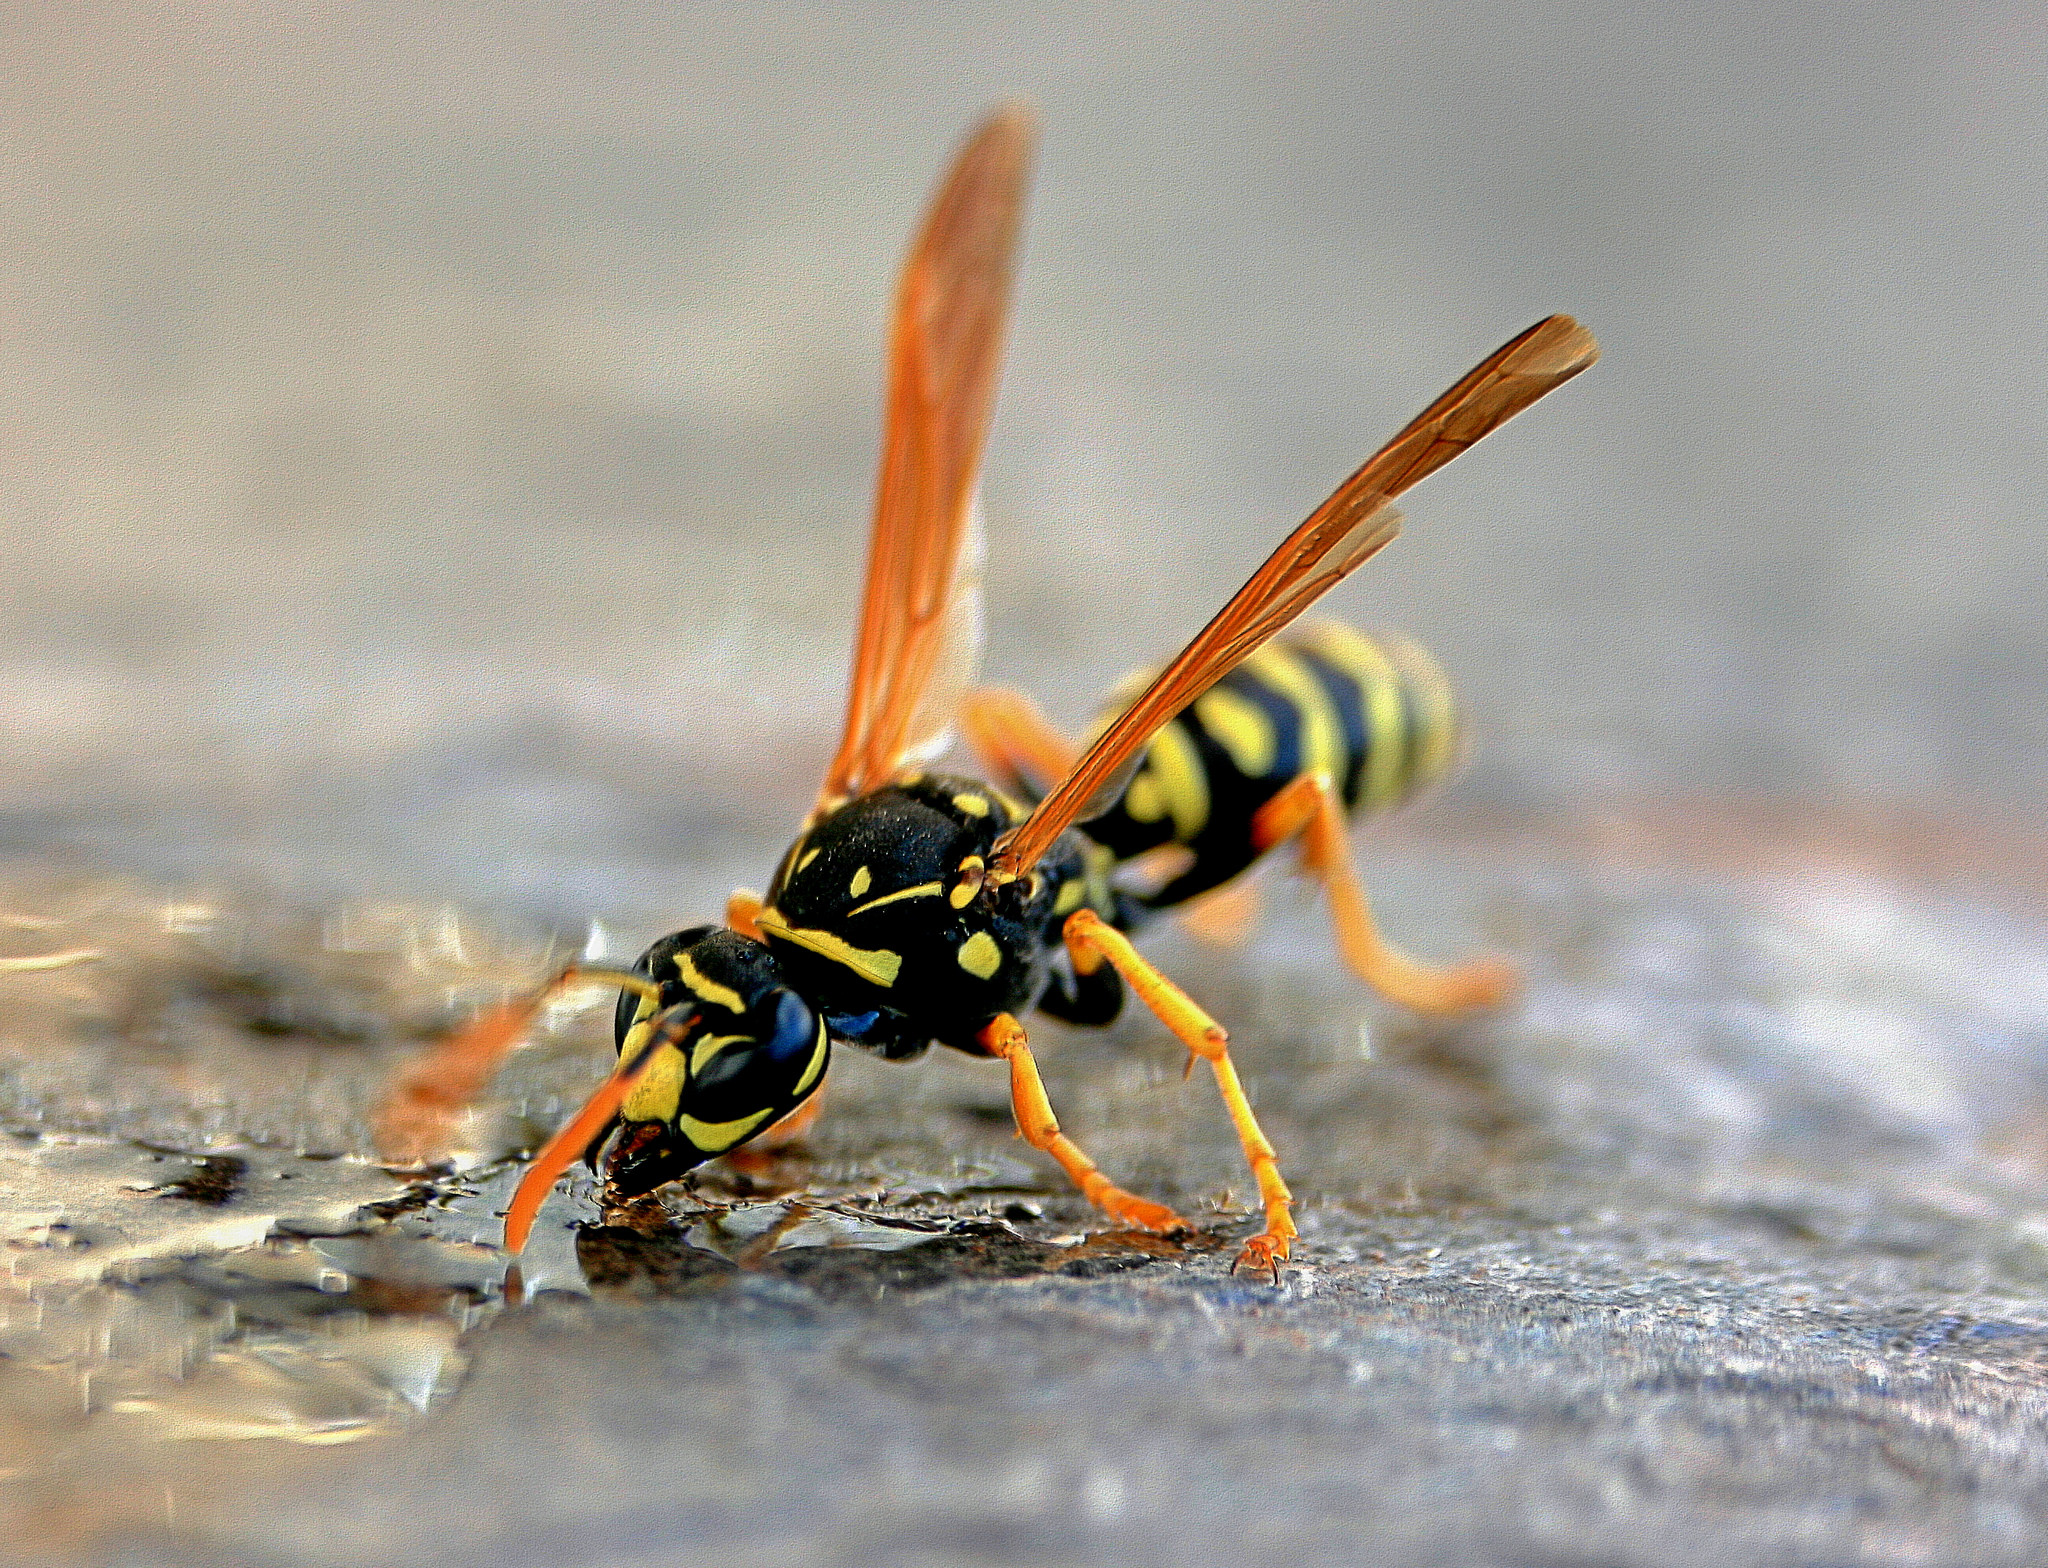 Drought driving more yellowjackets into backyards this year